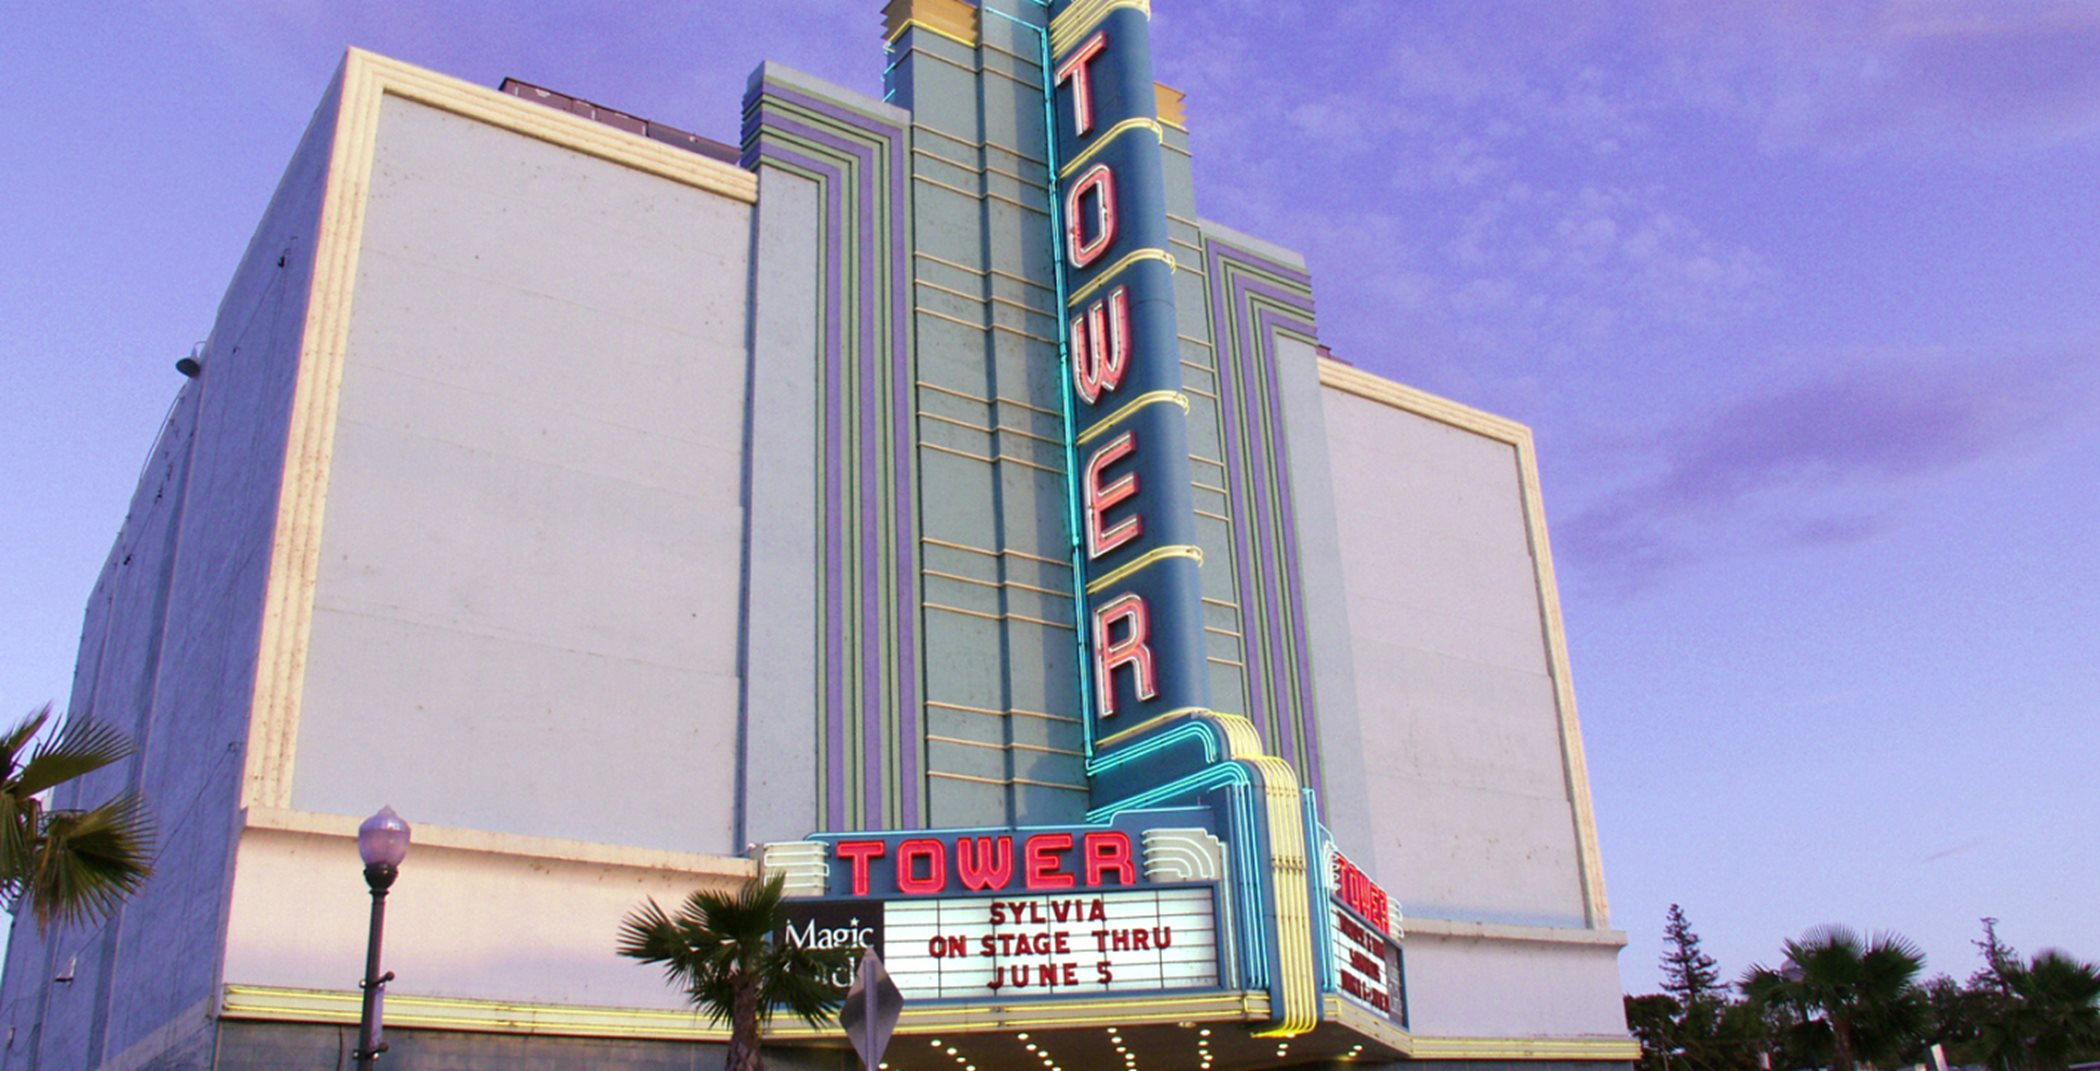 Tower Theater at dusk